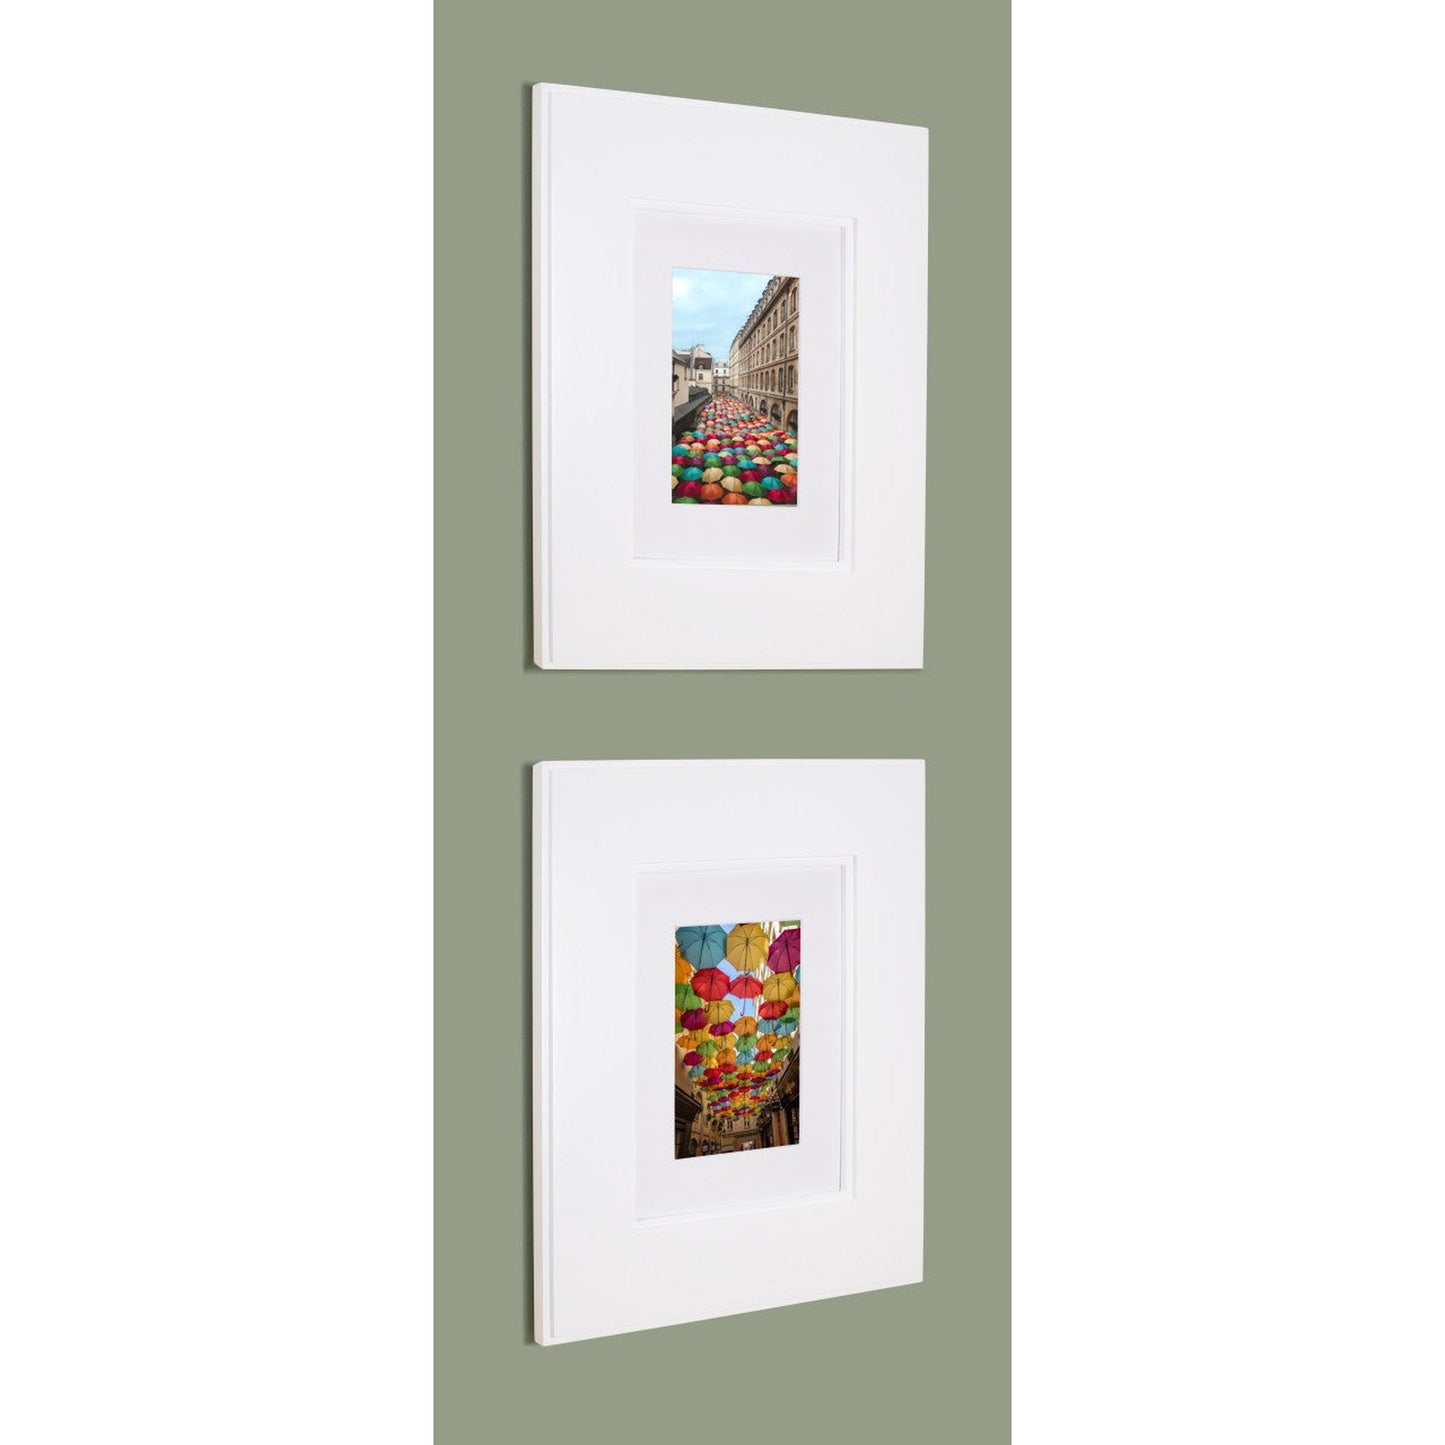 Fox Hollow Furnishings 11" x 14" White Compact Portrait Shaker Special 3" Depth Recessed Picture Frame Medicine Cabinet With Mirror and Ivory Matting